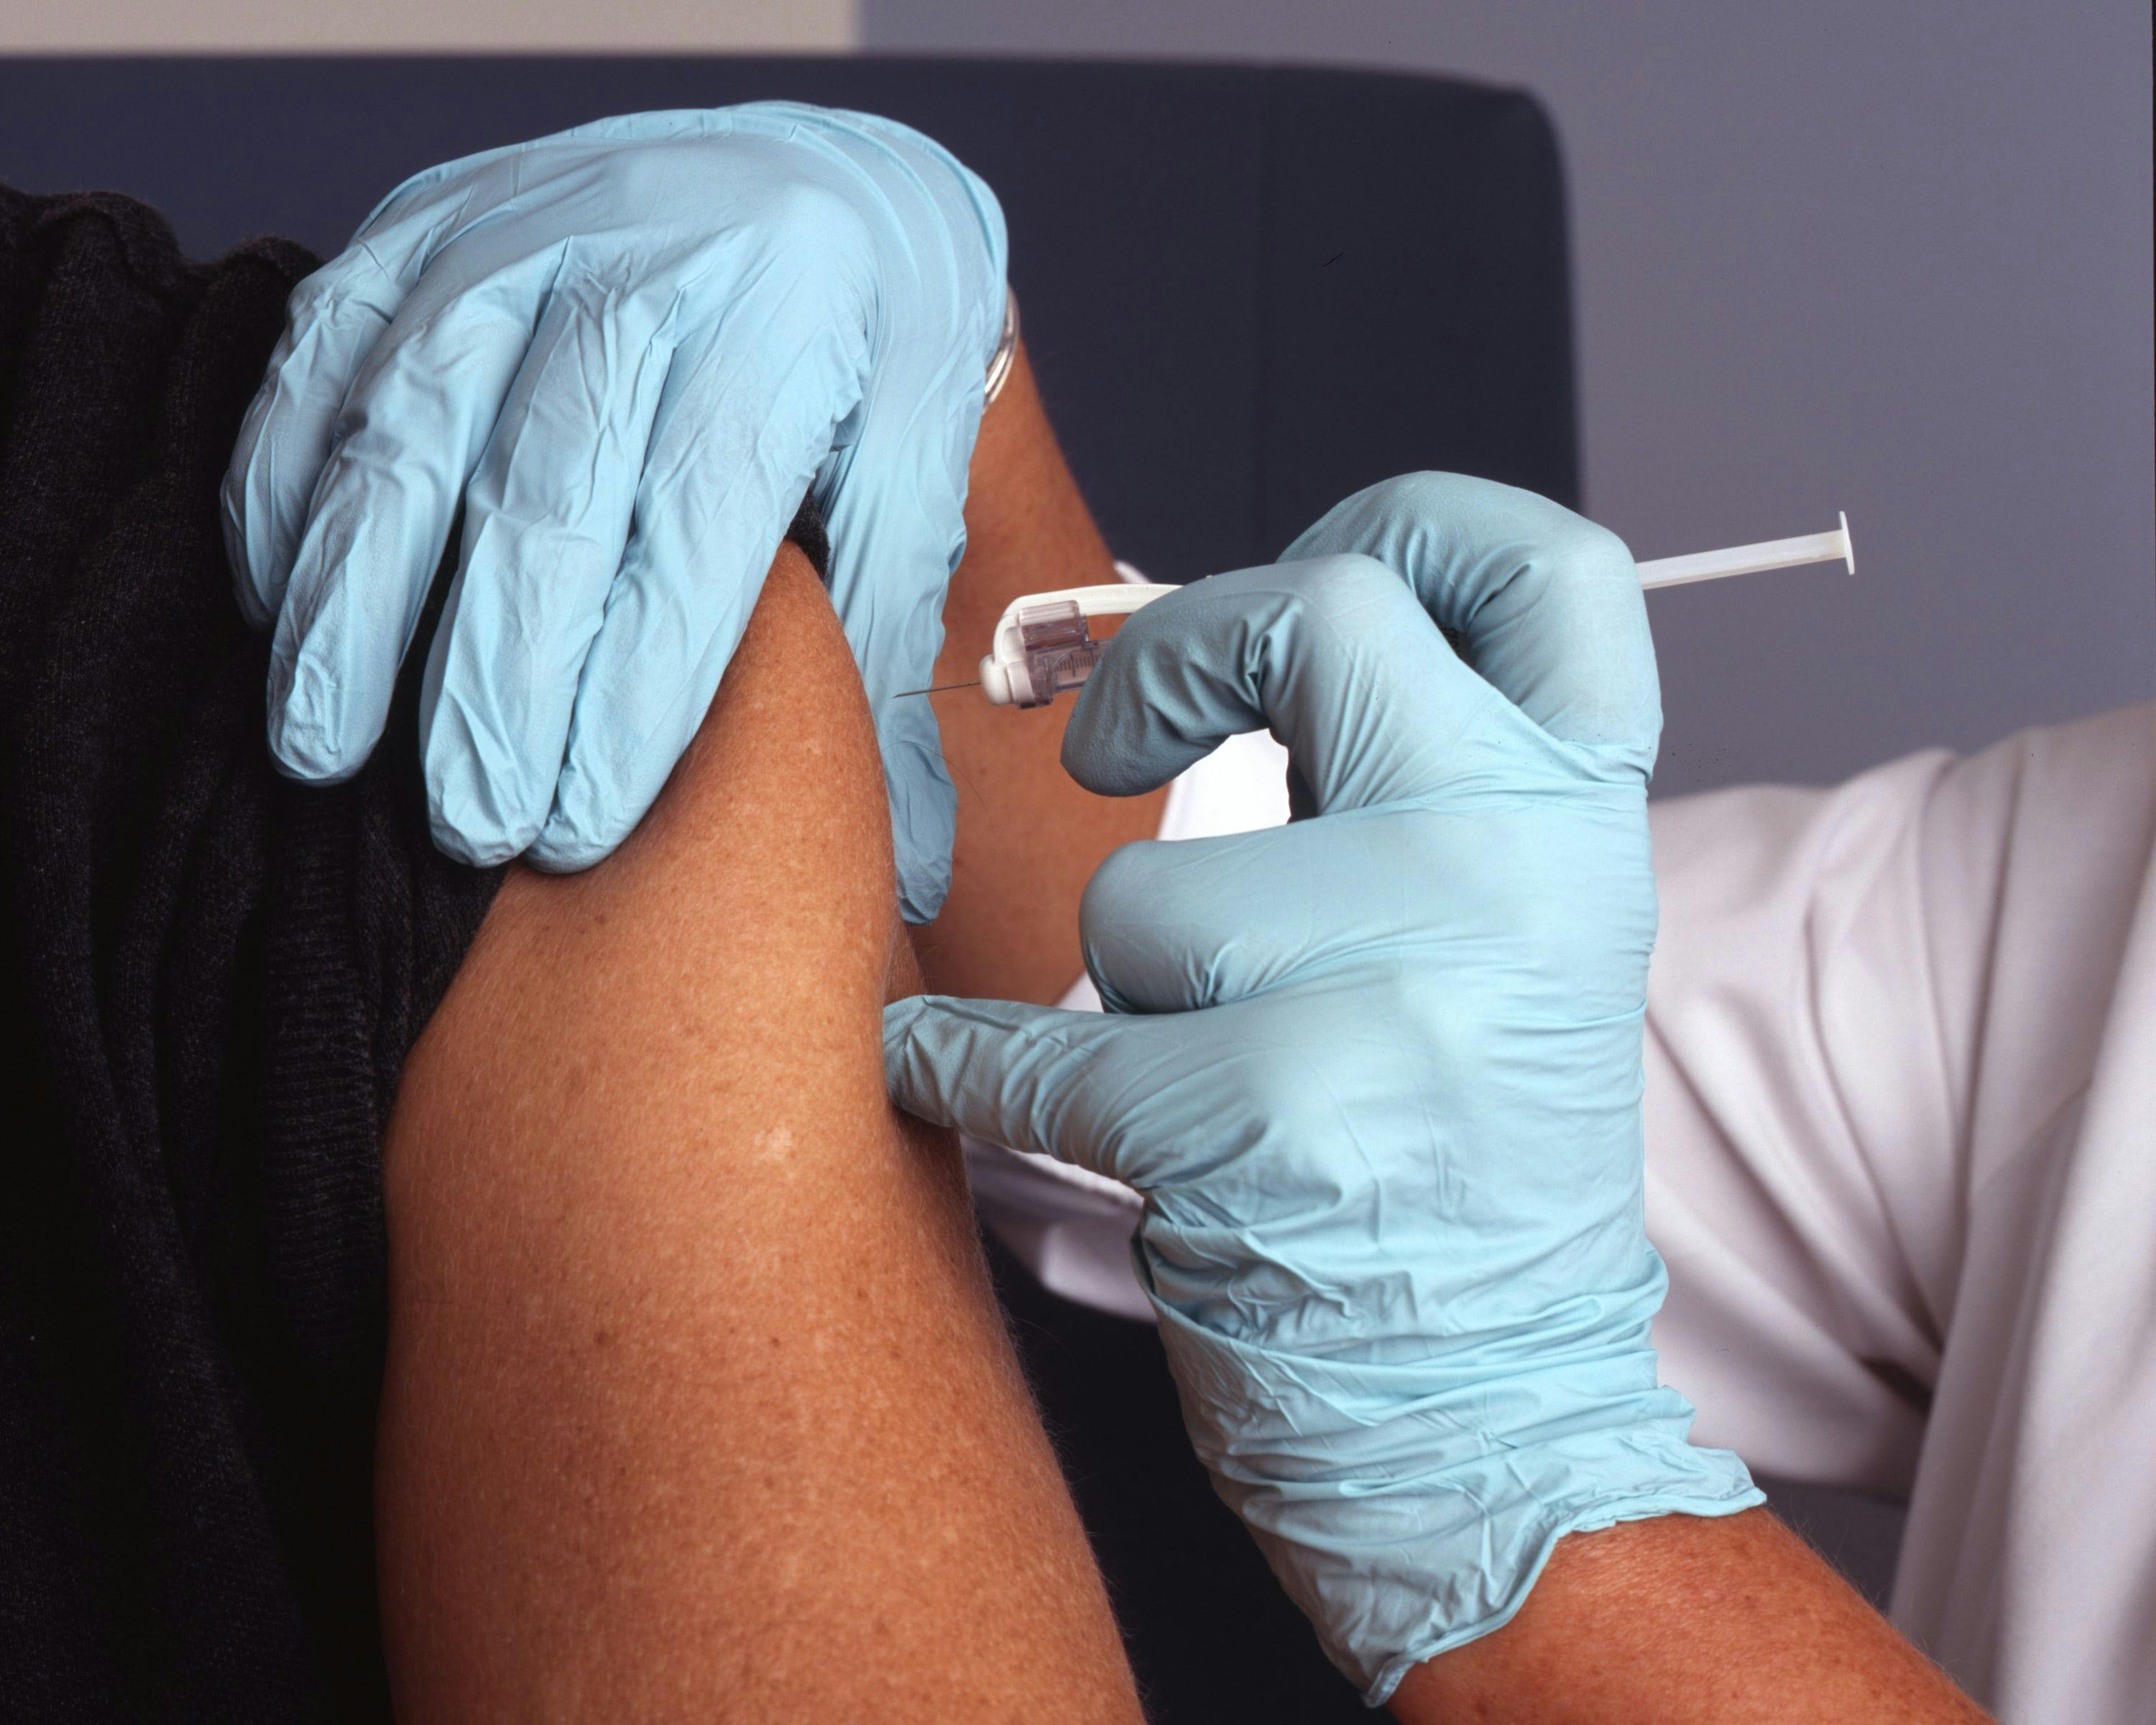 Hepatitis B Vaccine Adherence Stronger in 2 Doses Compared to 3